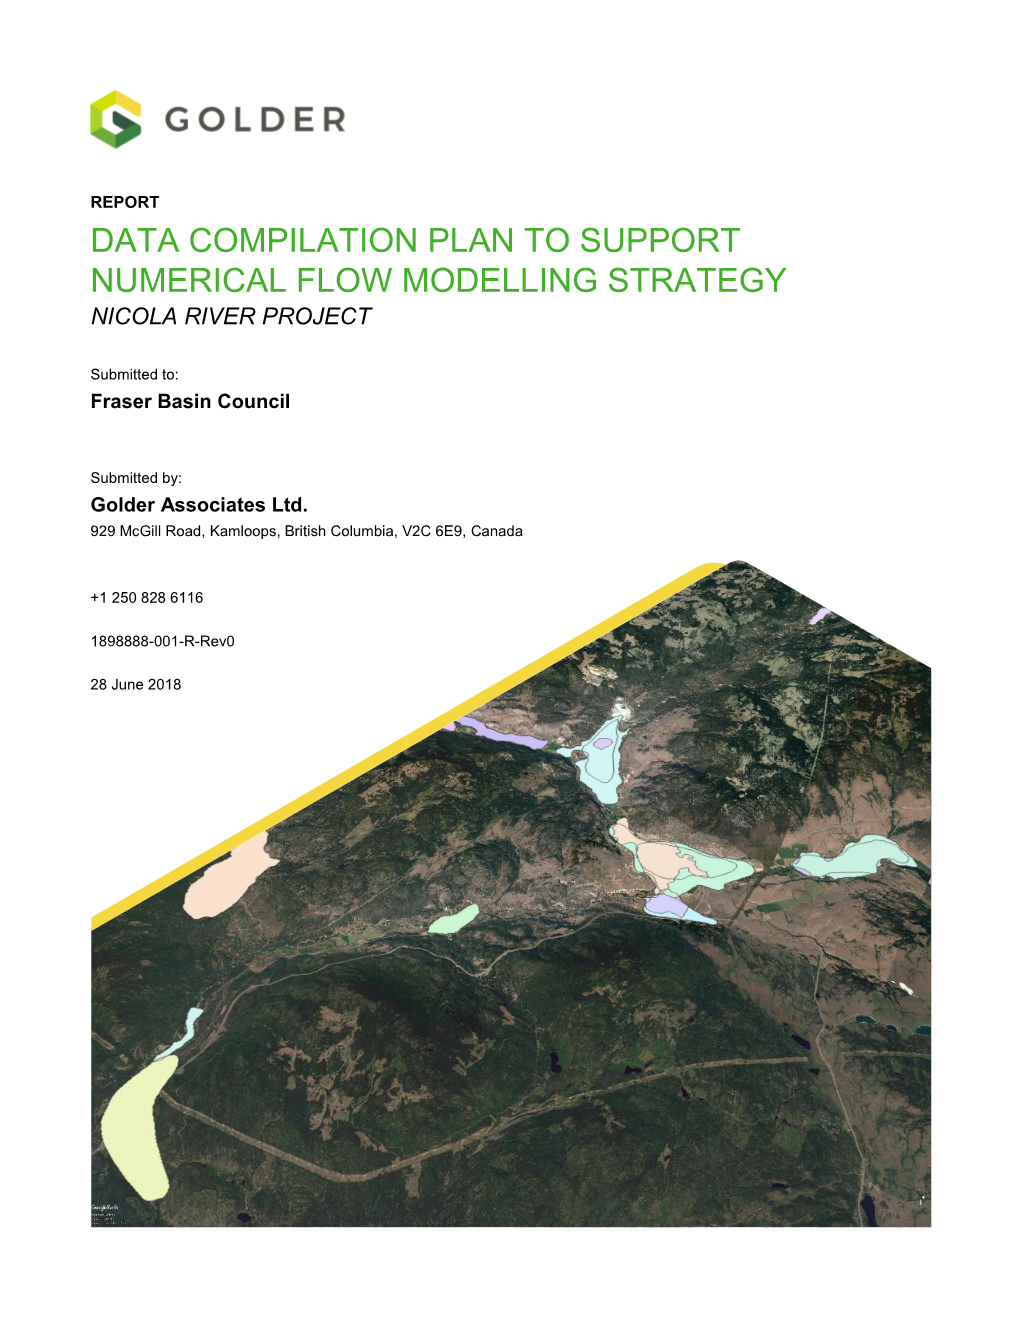 Data Compilation Plan to Support Numerical Flow Modelling Strategy Nicola River Project